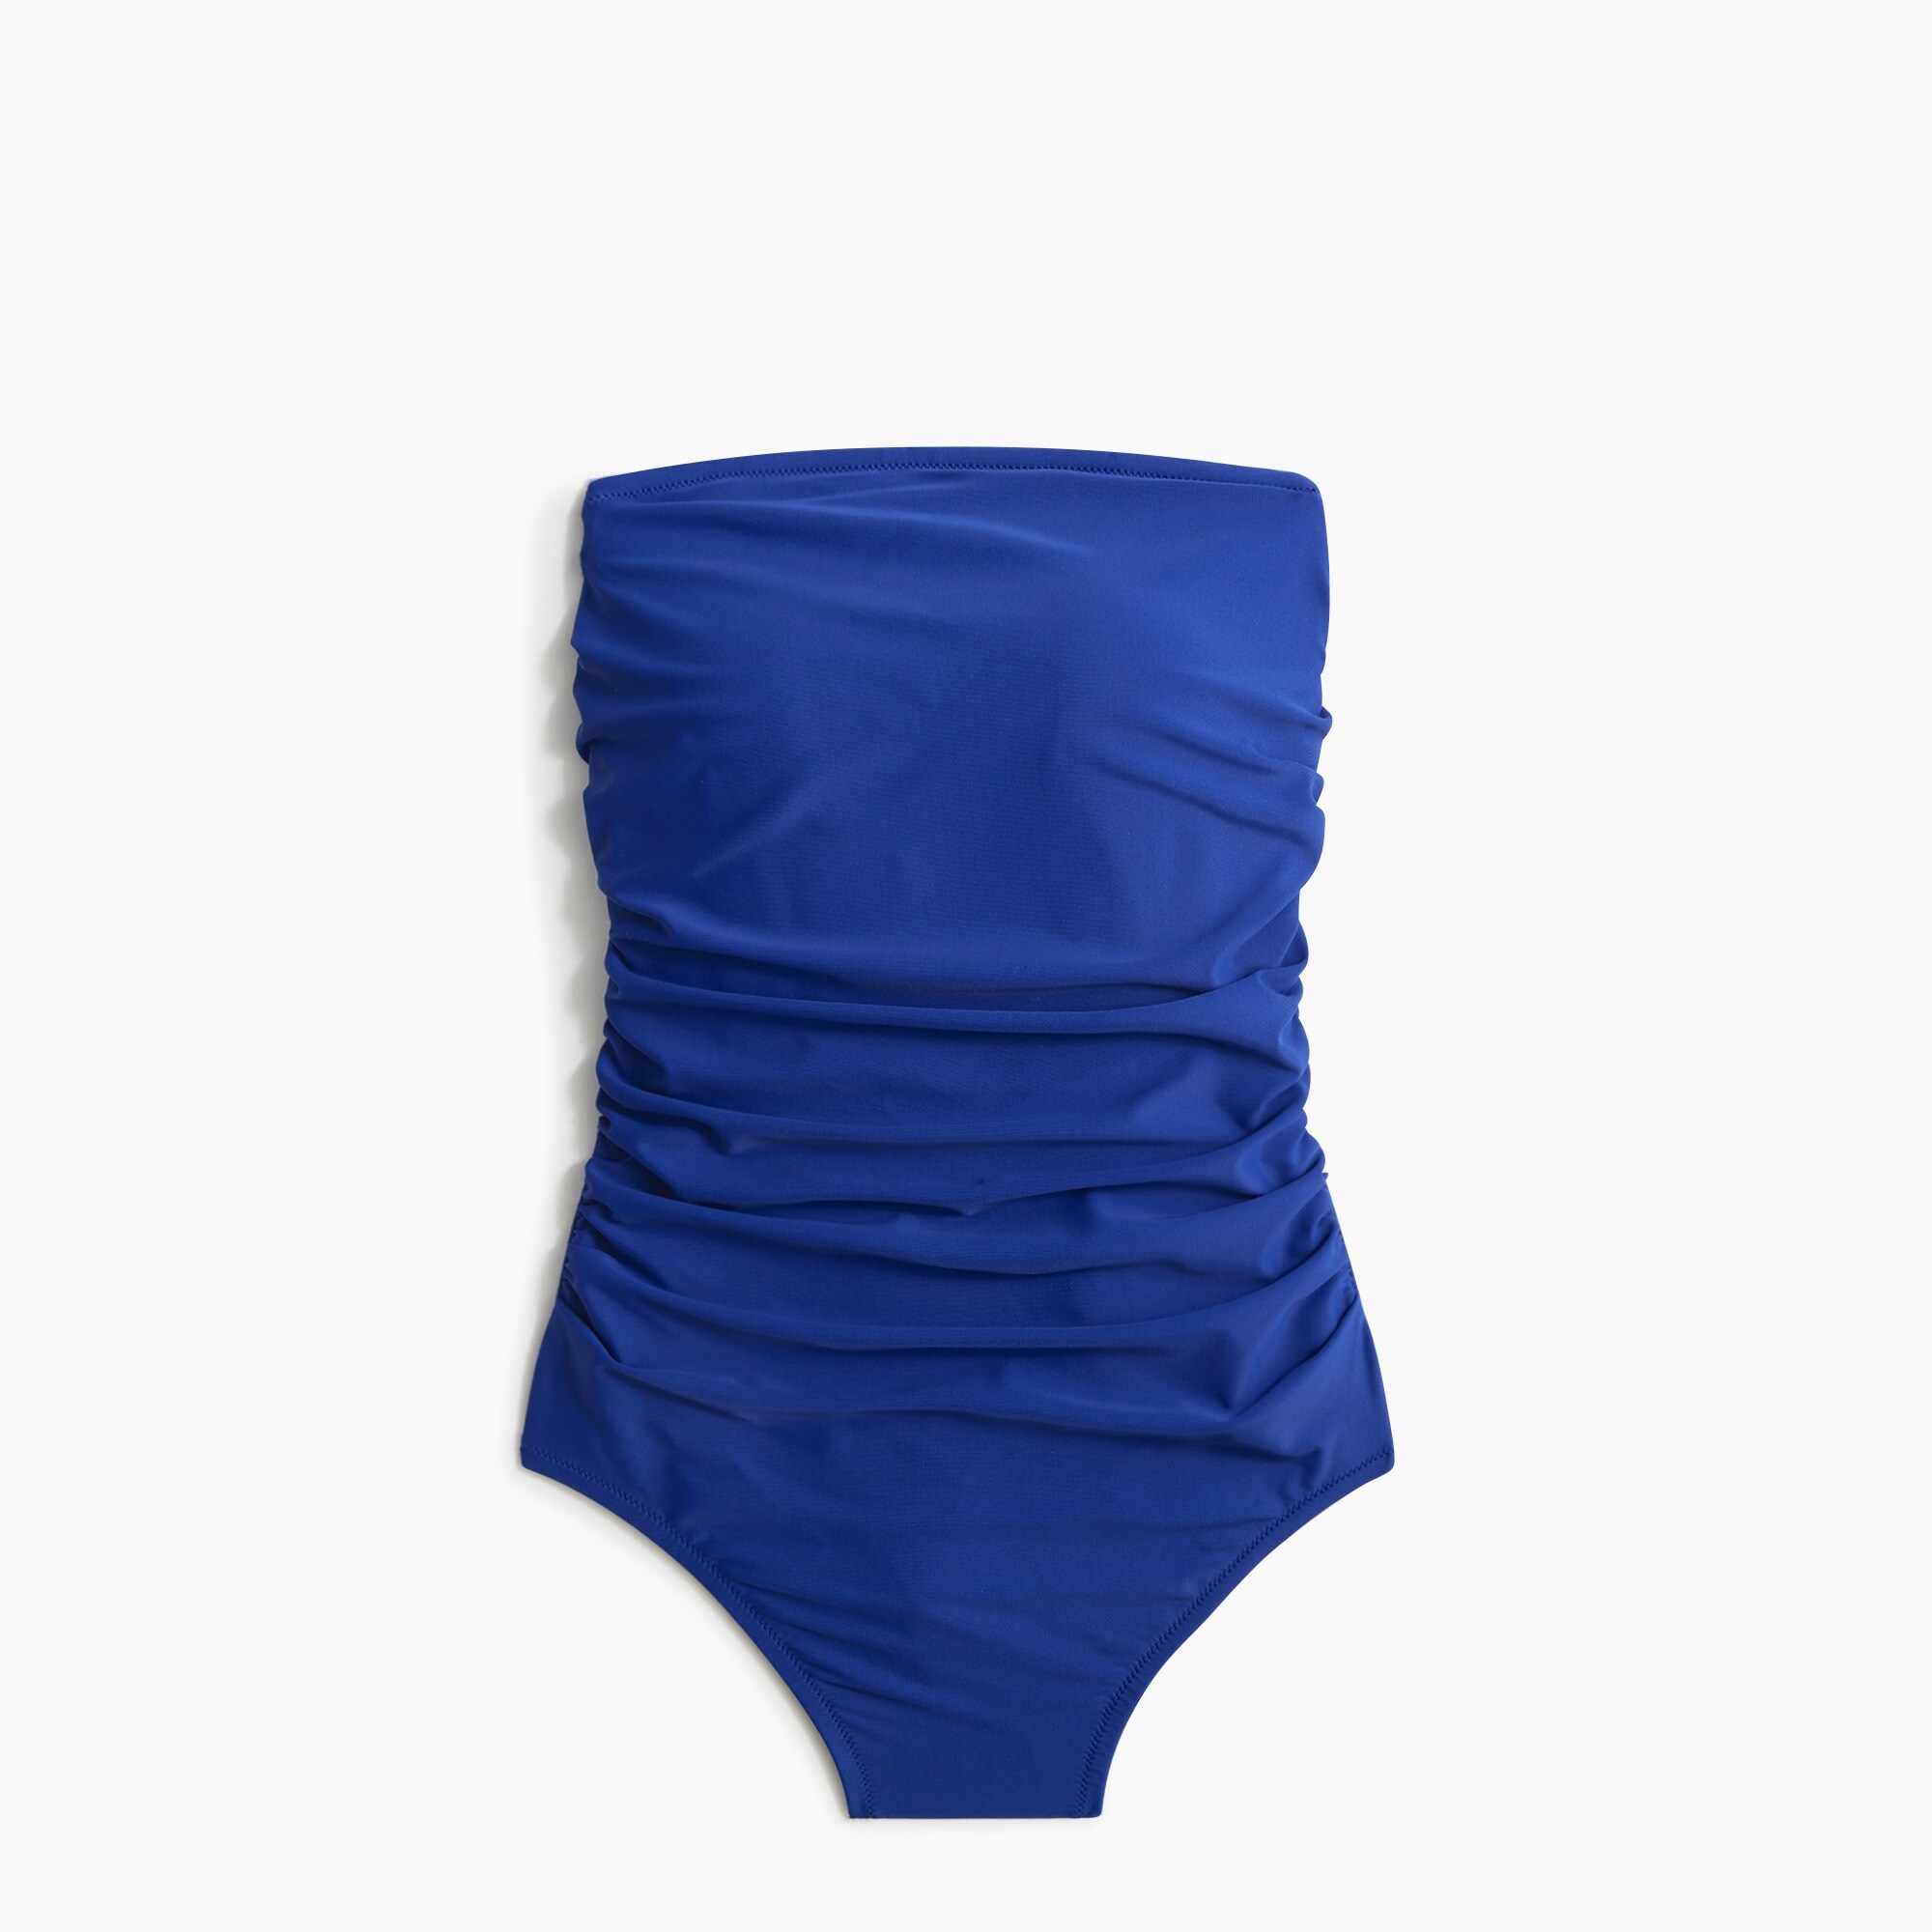  Strapless one-piece swimsuit